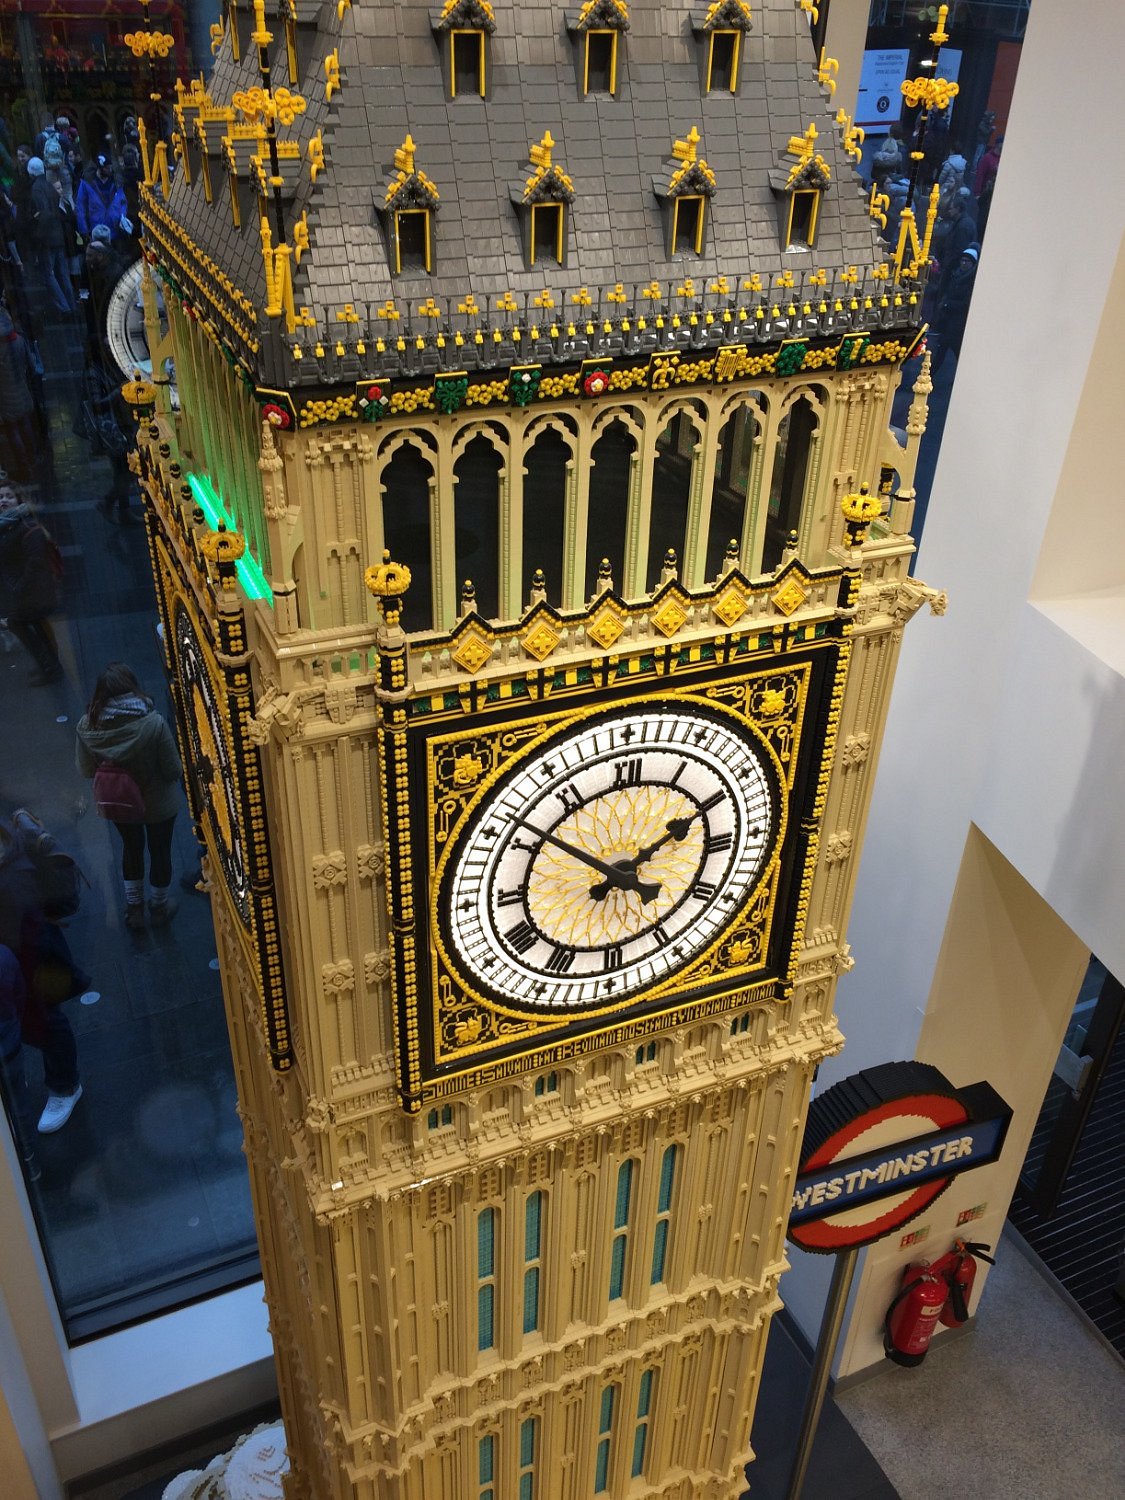 Lego Store in London Is World's Biggest: See Photos